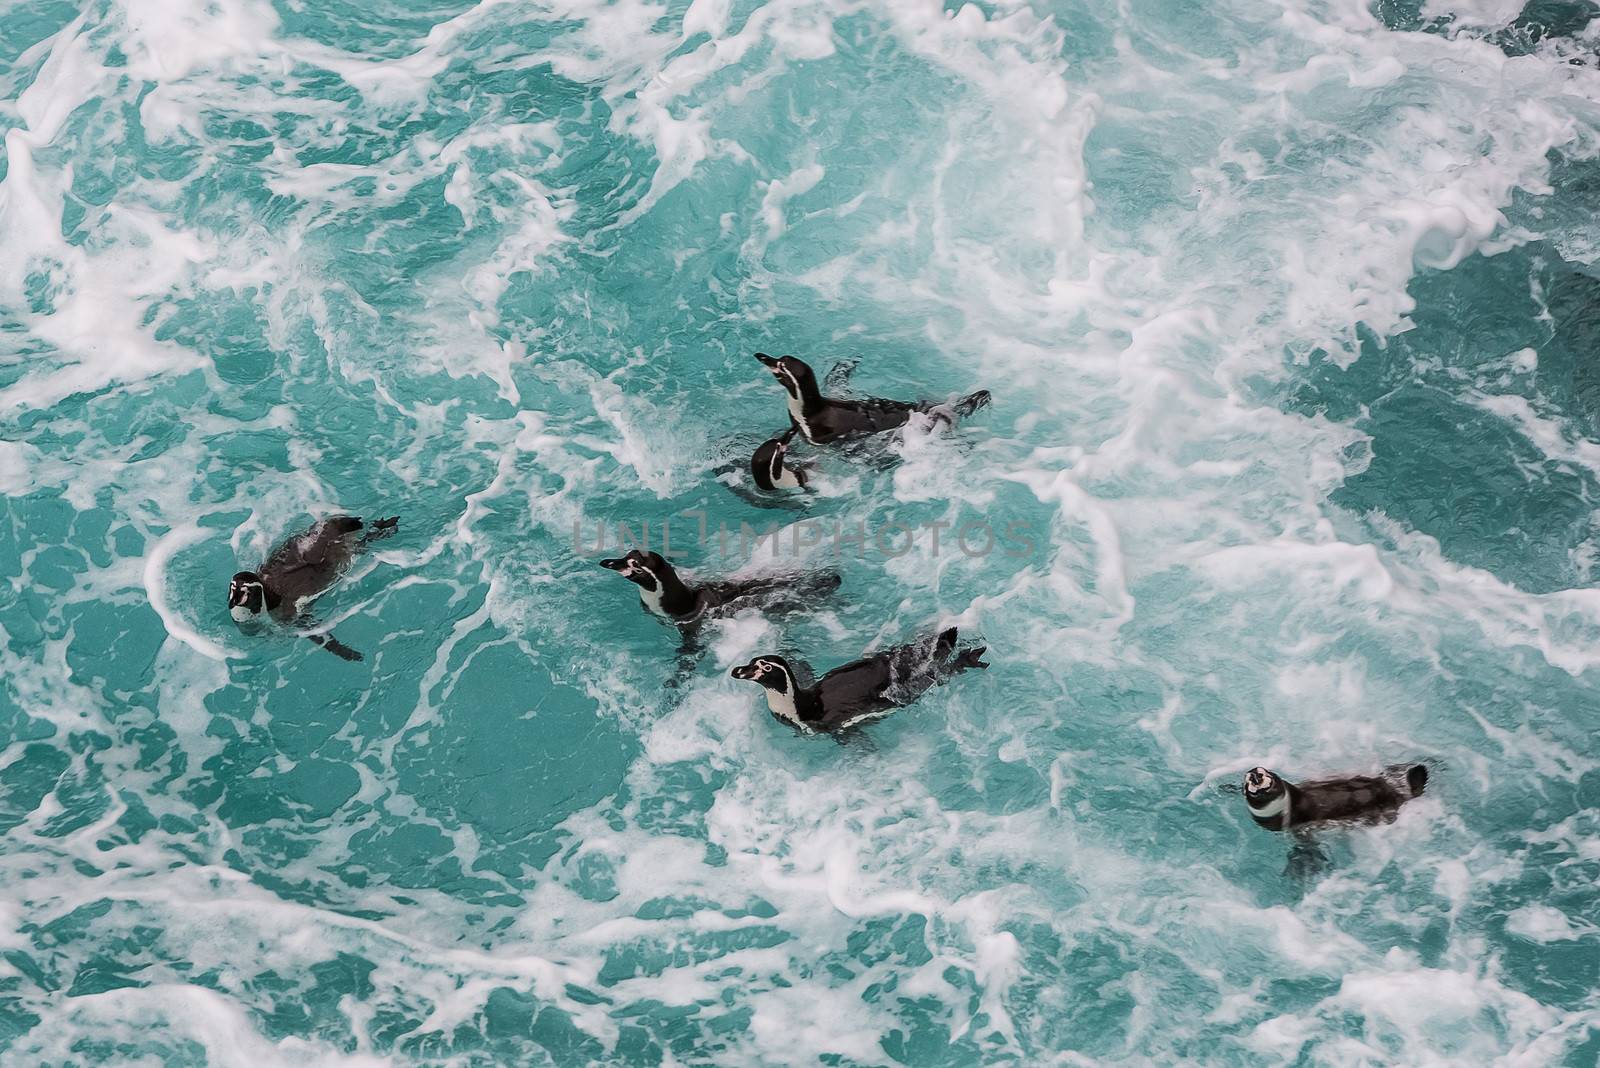 Humboldt penguins swimming in the peruvian coast at Ica Peru by PIXSTILL